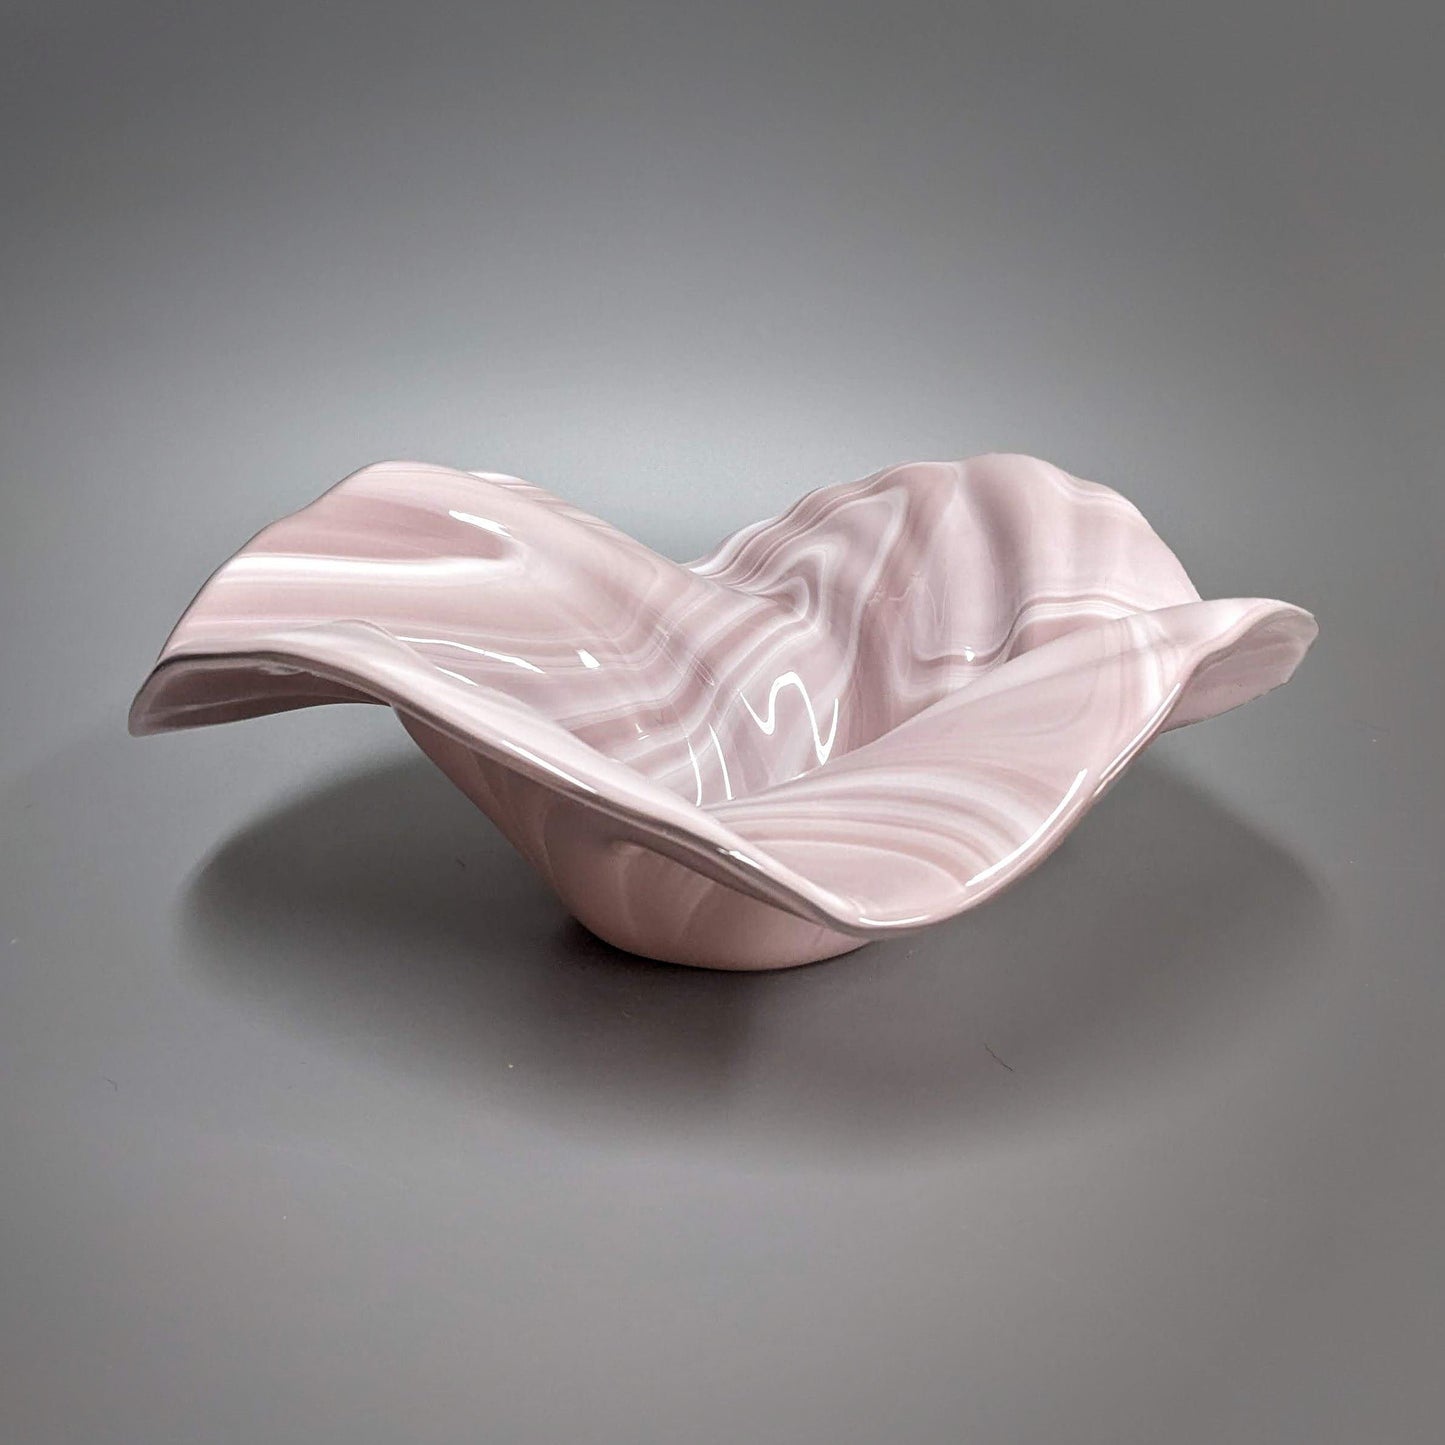 Glass Art Wave Bowl in Pink Mauve White